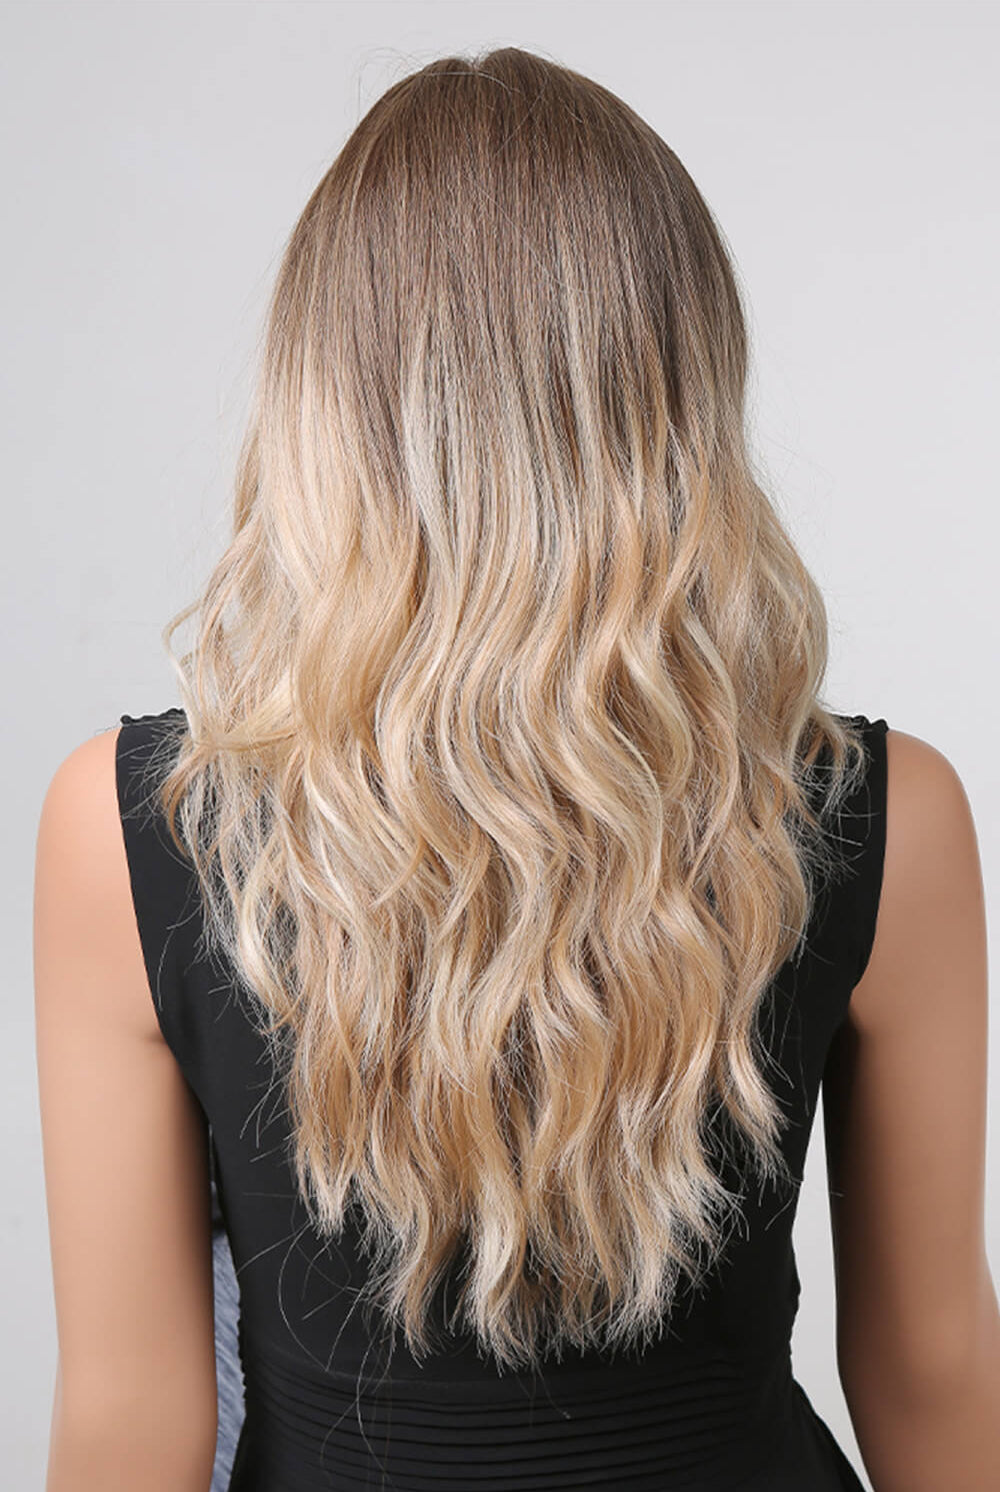 Rosy Brown Sun's Down 13*2" Long Wave Lace Front Synthetic Wigs 24" Long 150% Density- Blonde Ombre Wigs